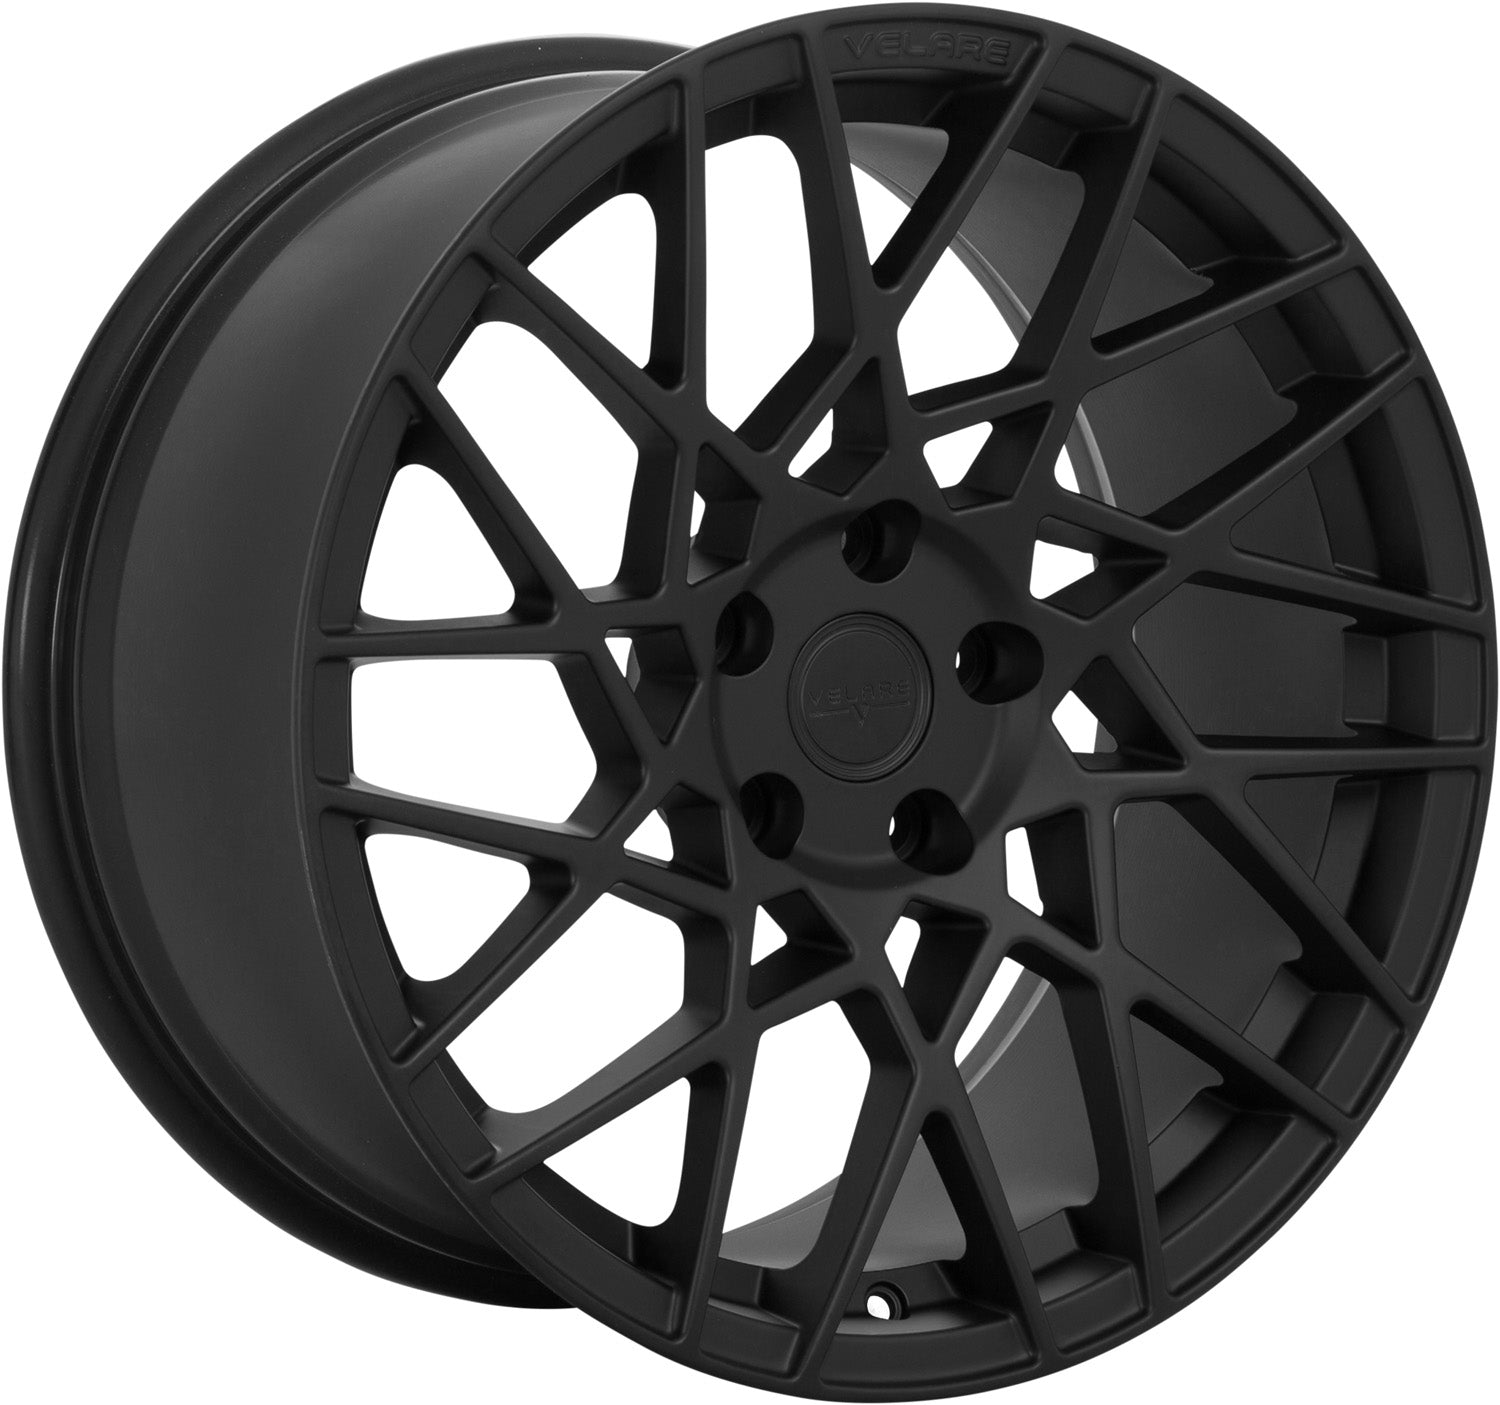 VLR03 Wheel and Tyre Package